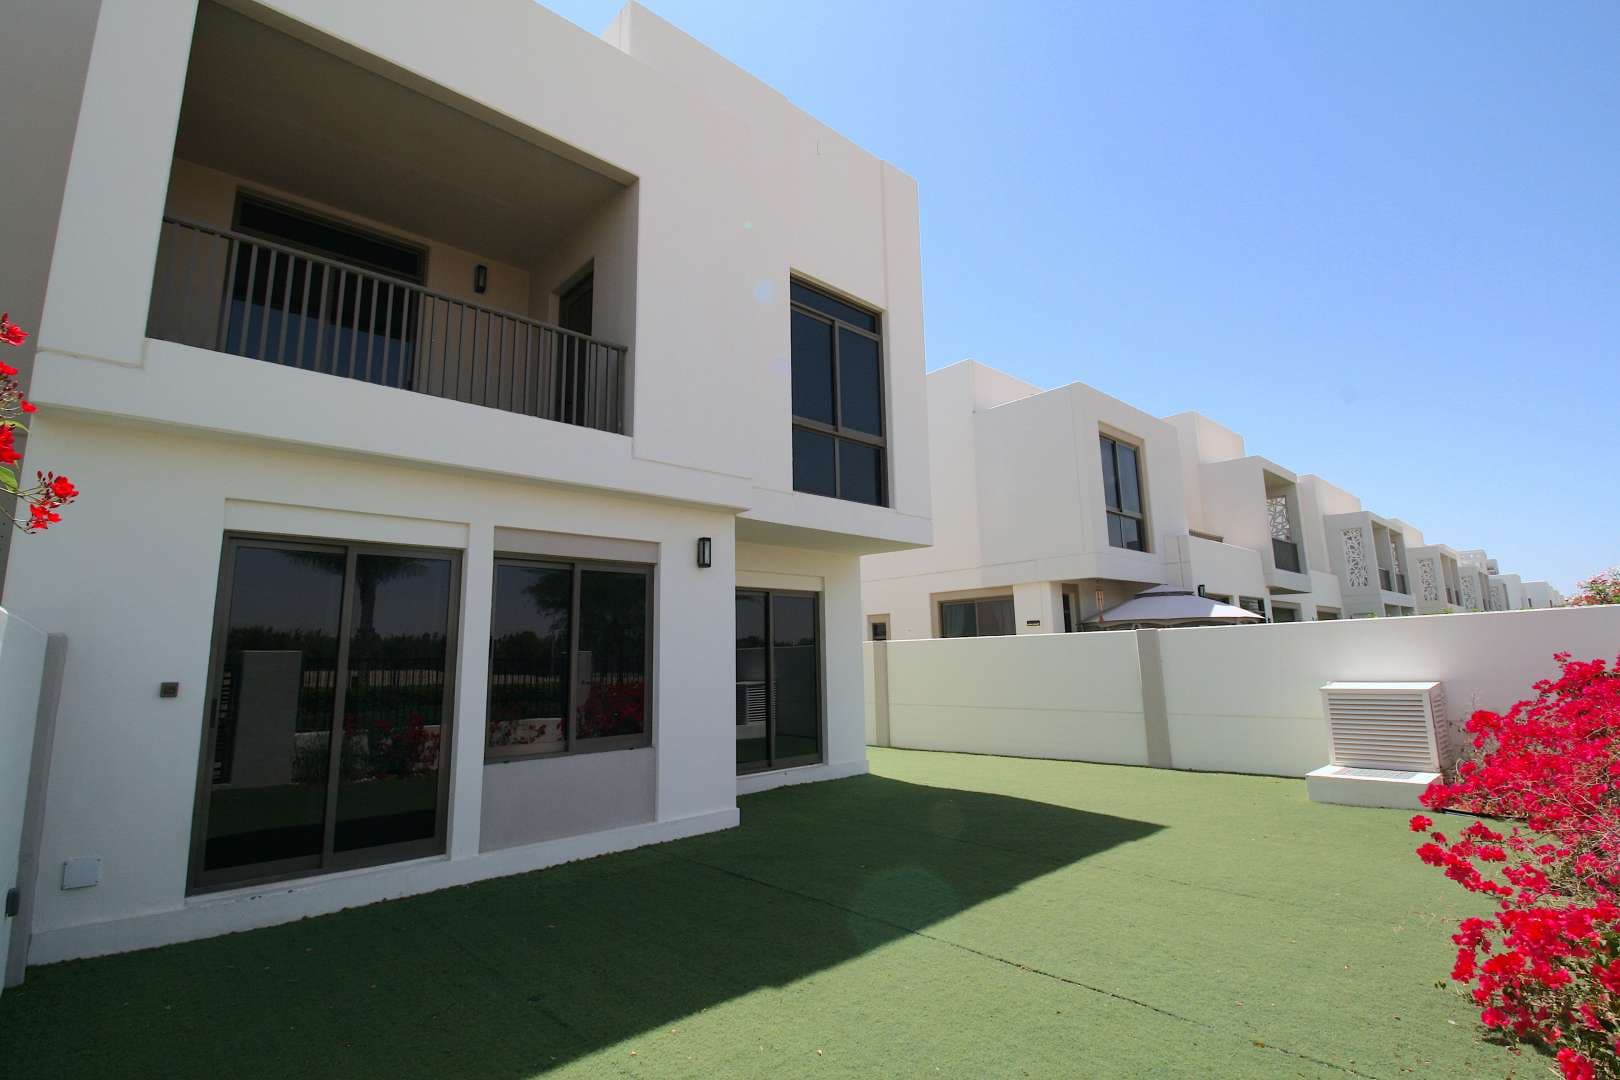 4 Bedroom Townhouse For Rent Zahra Townhouses Lp05562 1ad40057ccaad300.jpg